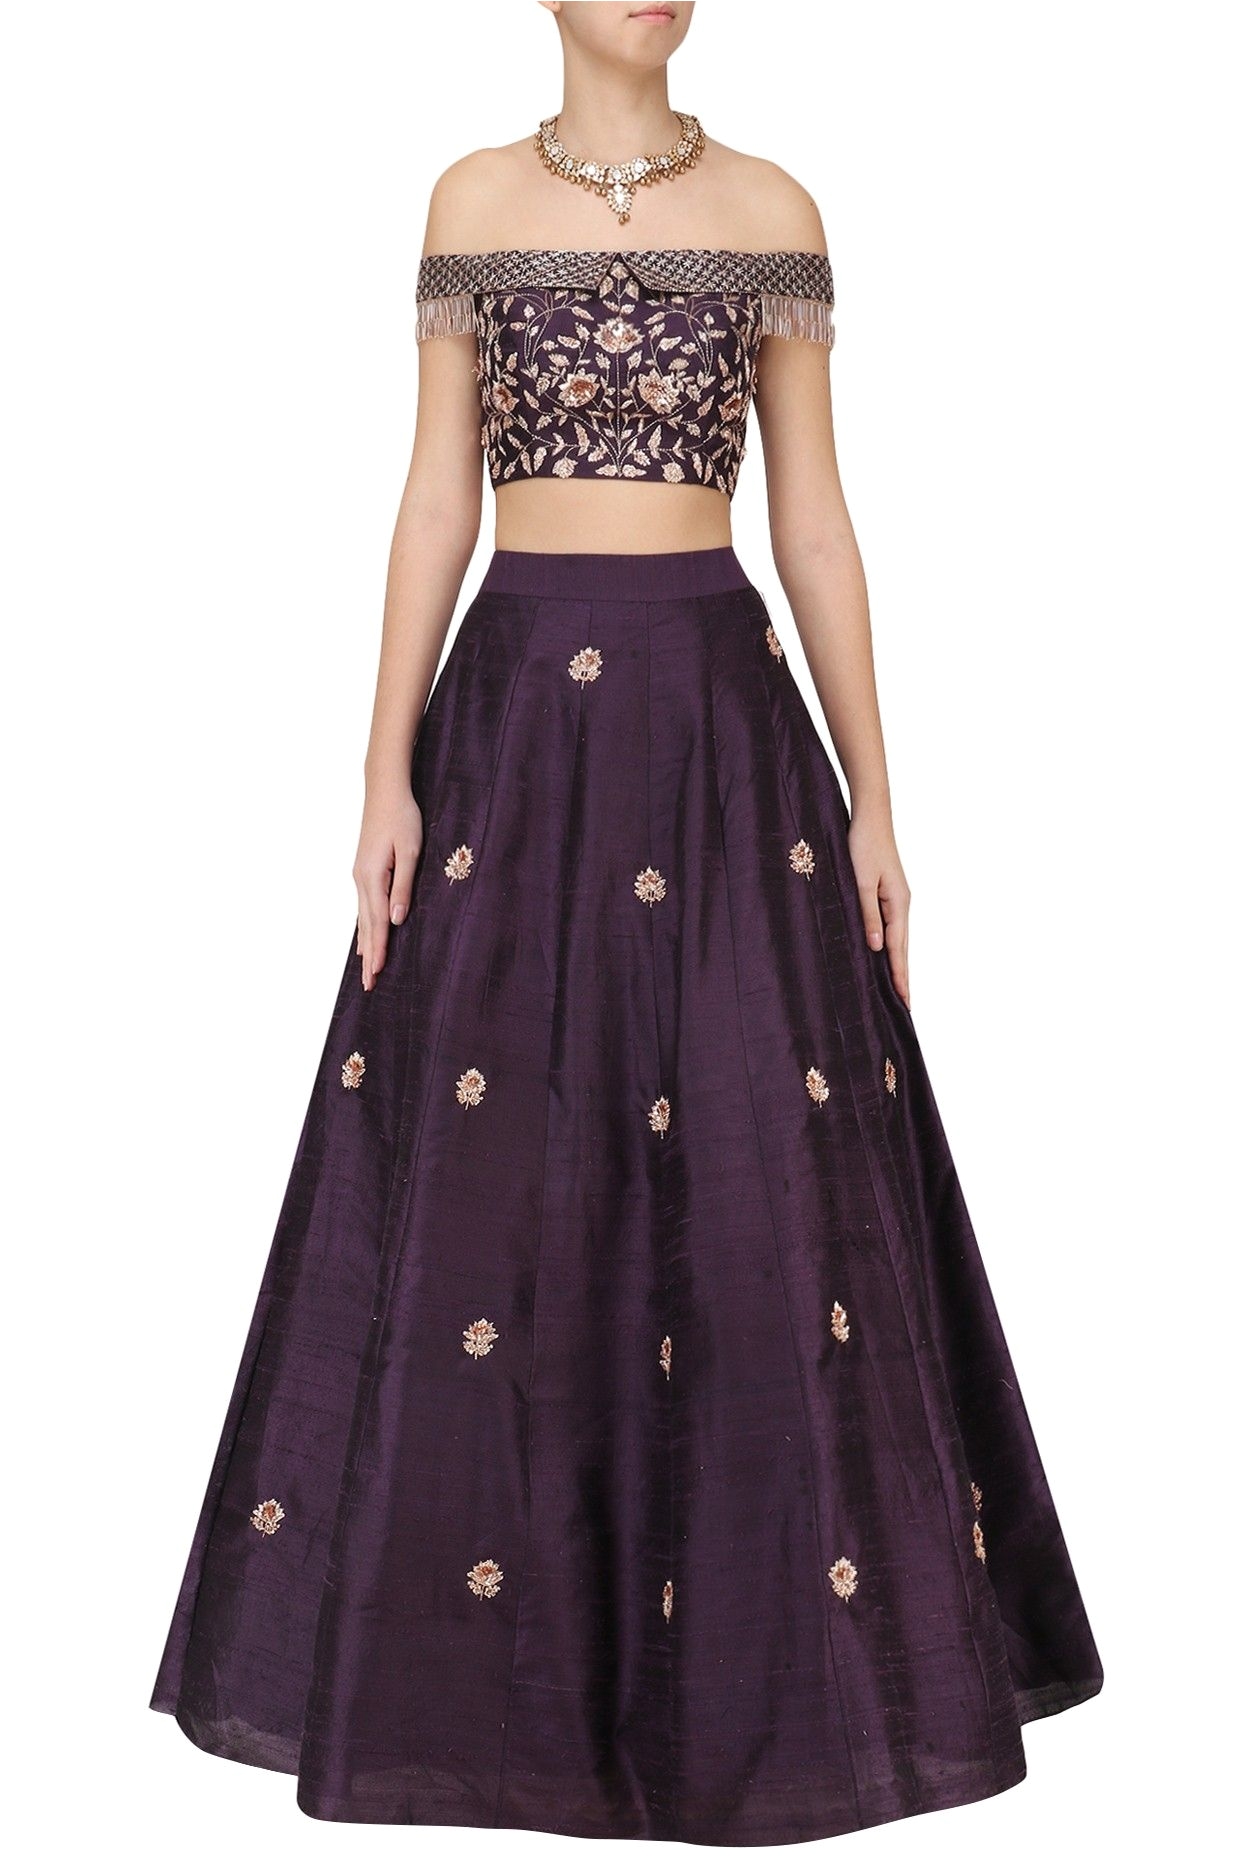 purple collared off shoulder crop top and skirt indianfashion croptop skirt offshoulder indiandesigner embroidered ethnicwear pinkpeacockcouture